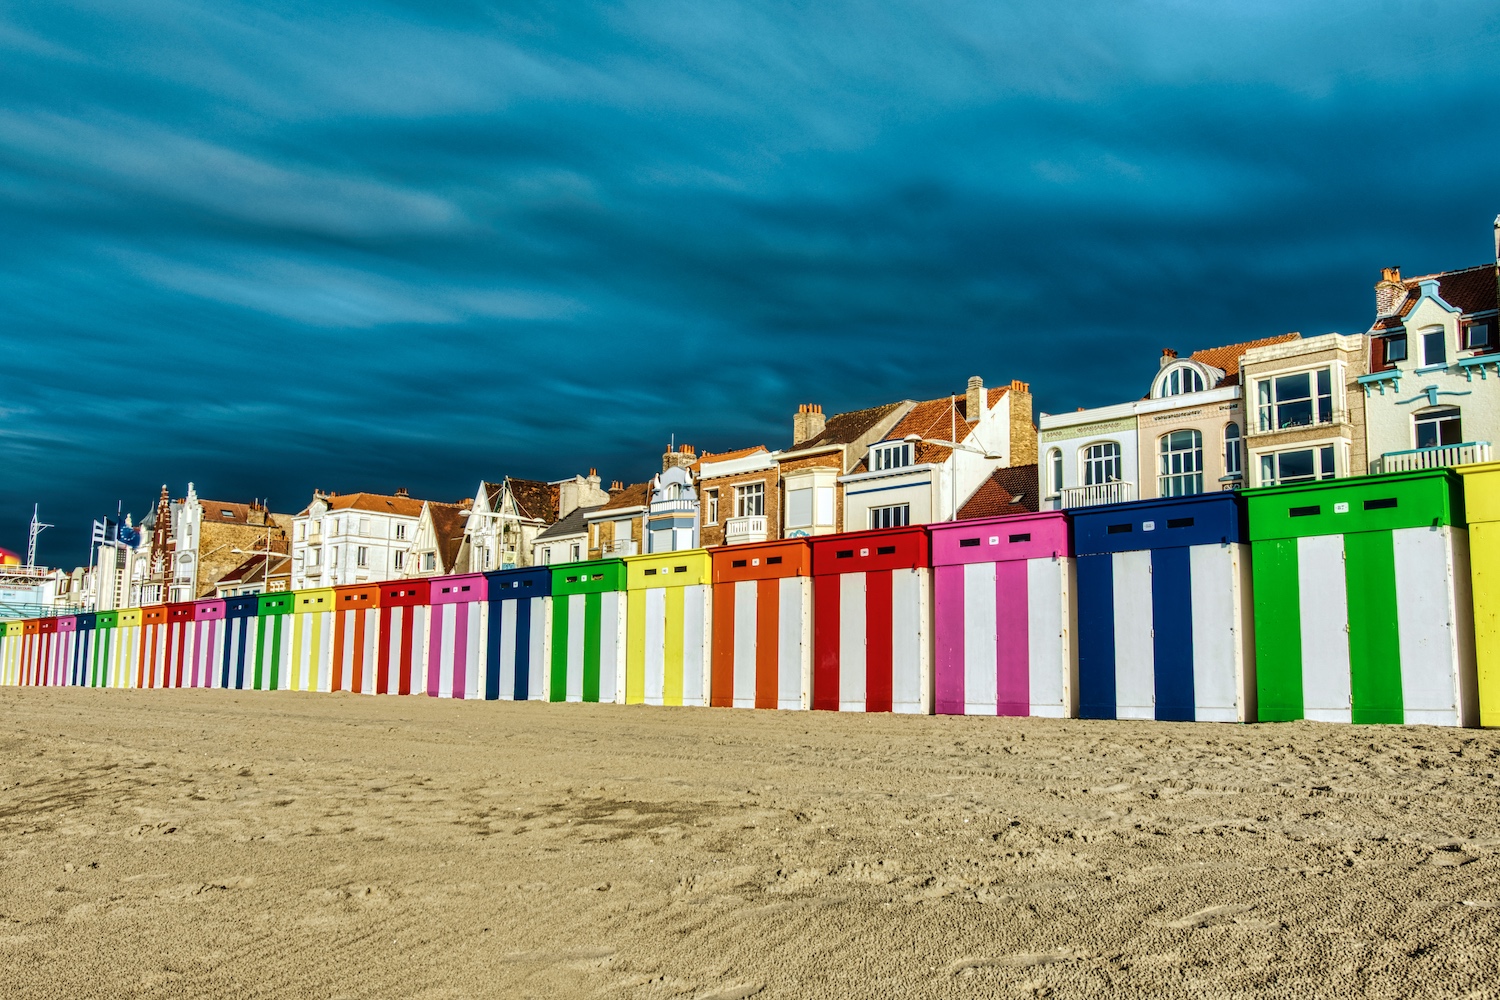 Bath cabins on the beach of Dunkerque in front of a threatening rain front